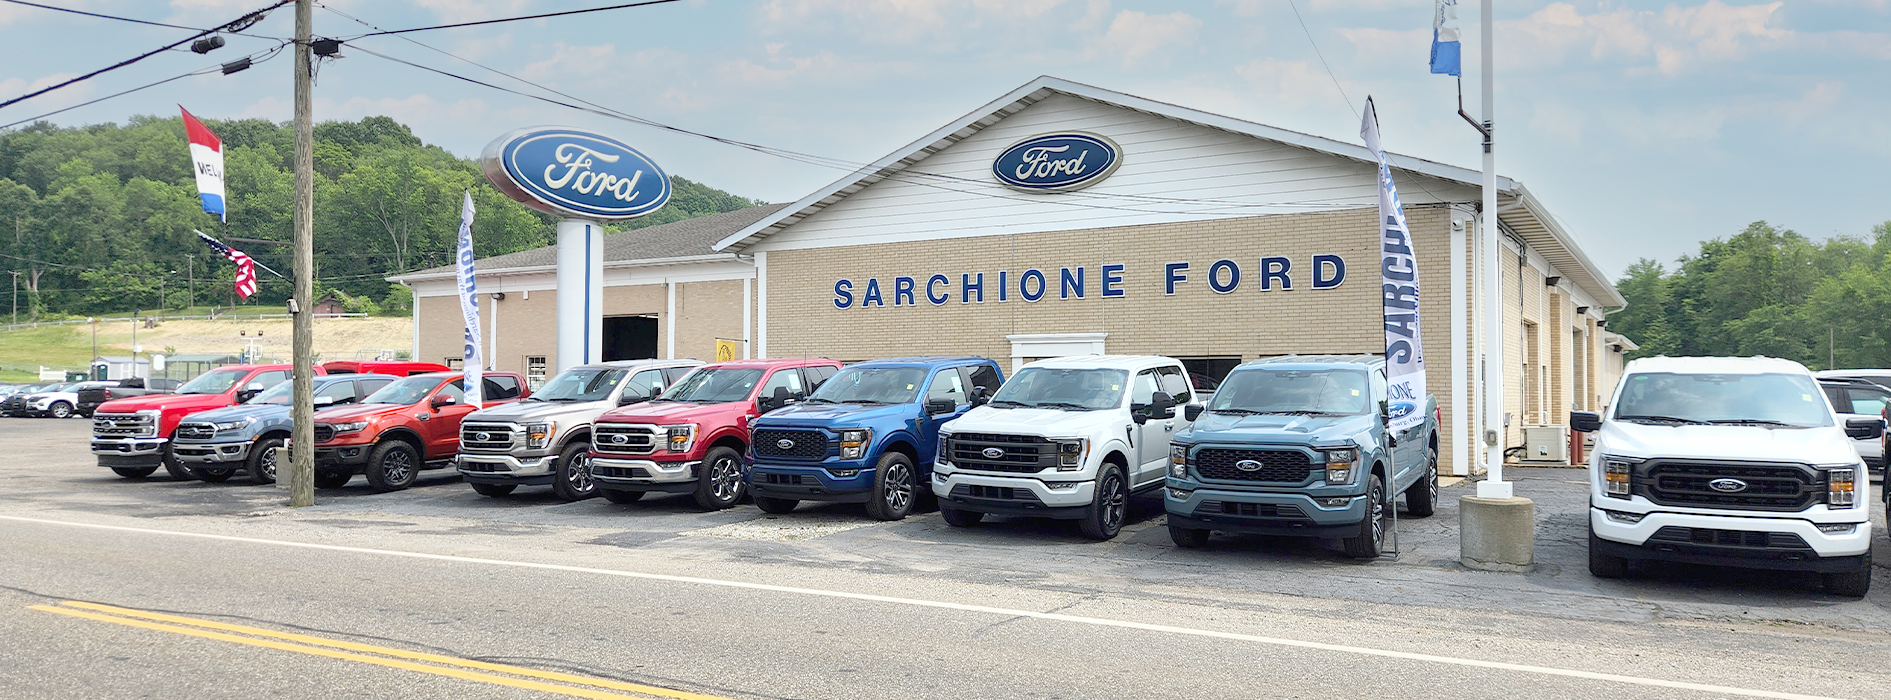 Image 10 | Sarchione Ford of Waynesburg